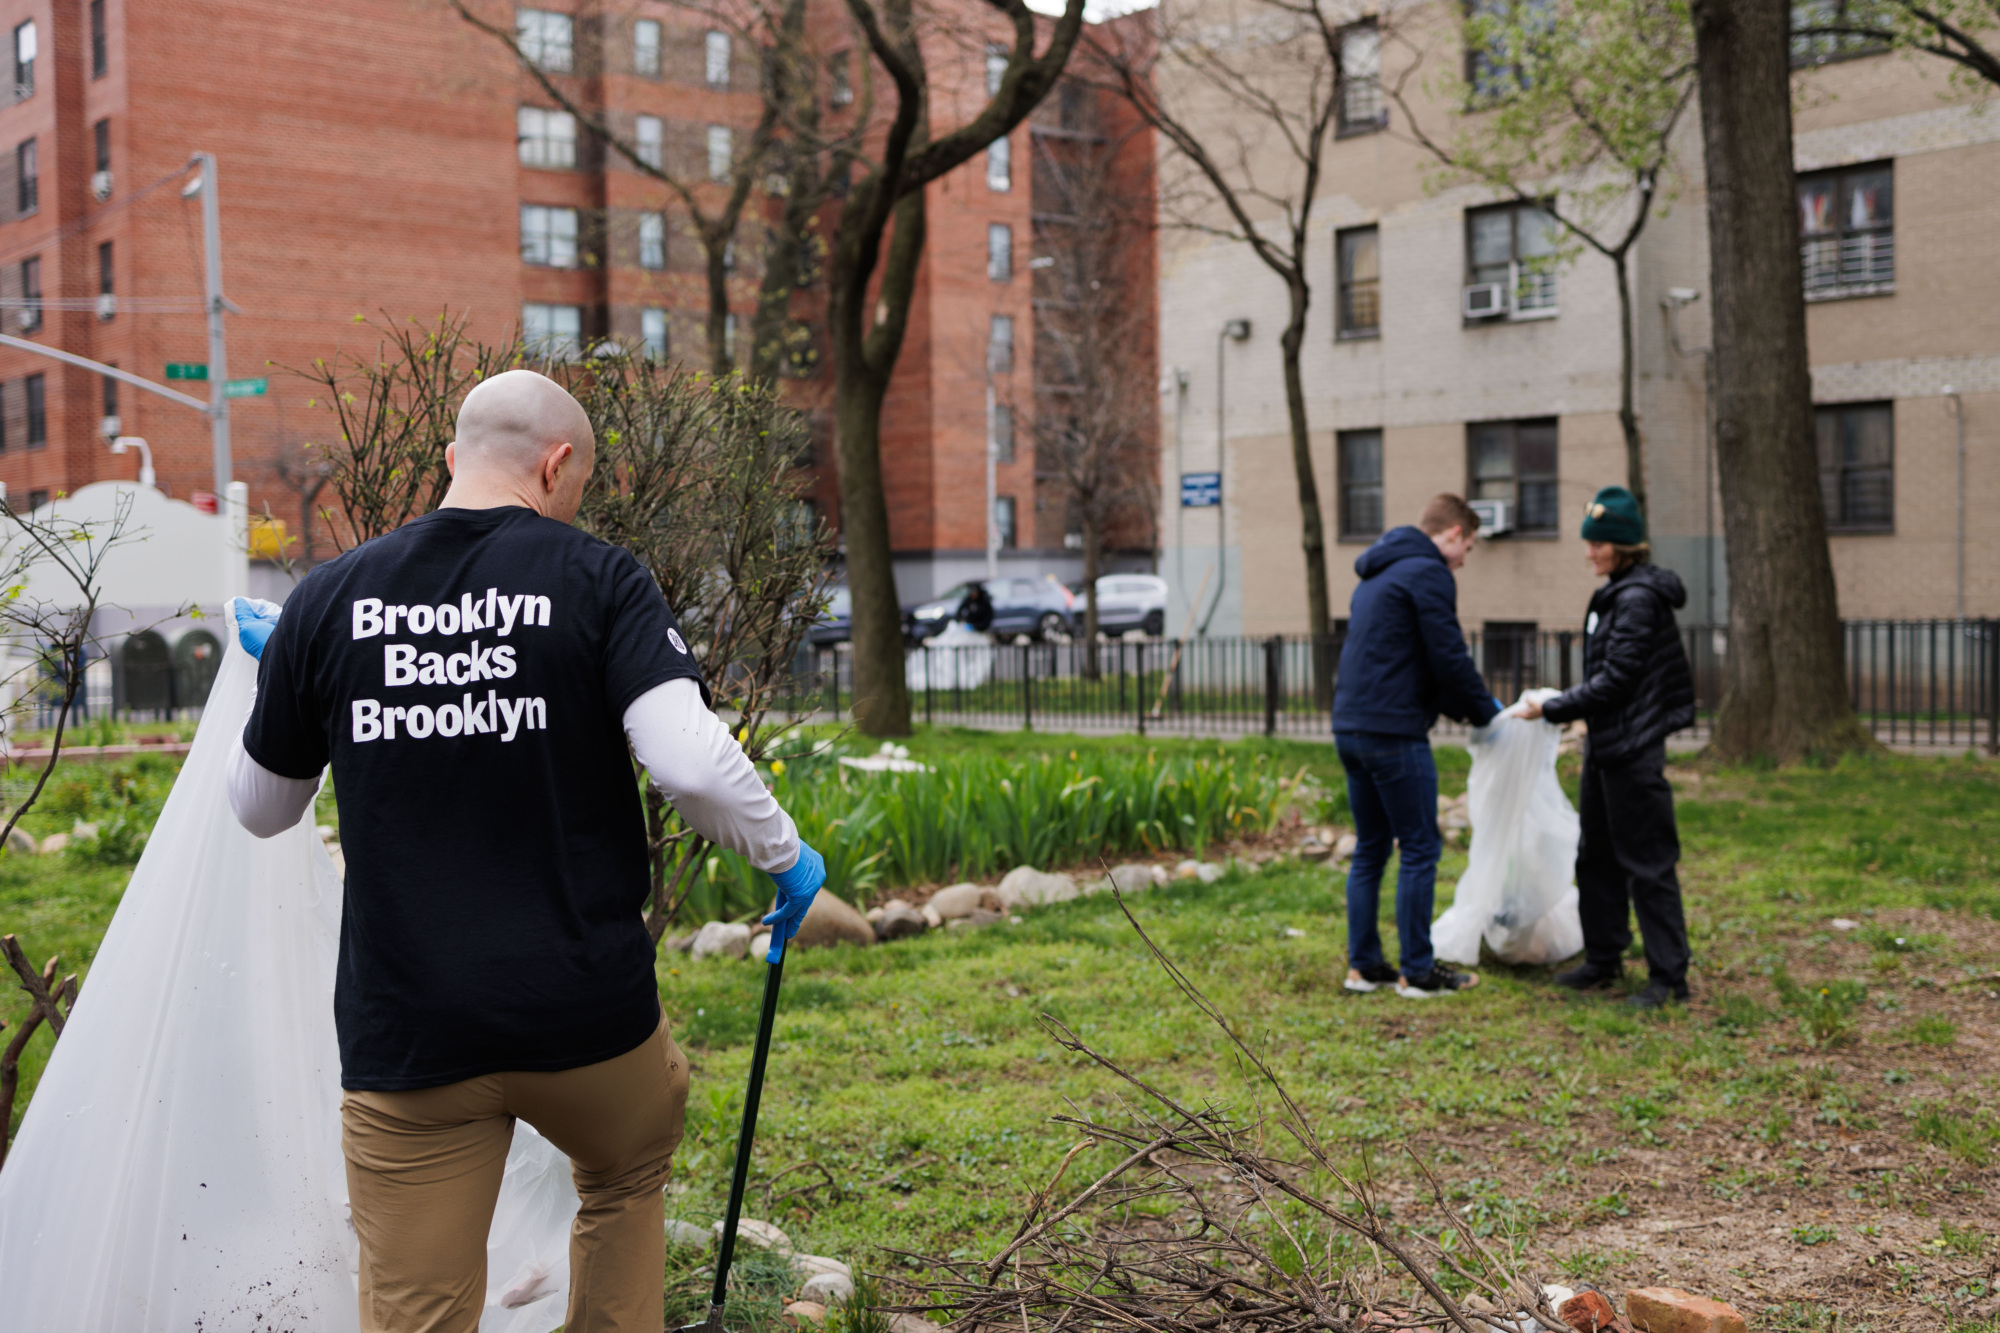 A person in a "brooklyn backs brooklyn" shirt participates in a community clean-up, picking up litter in an urban park with others.